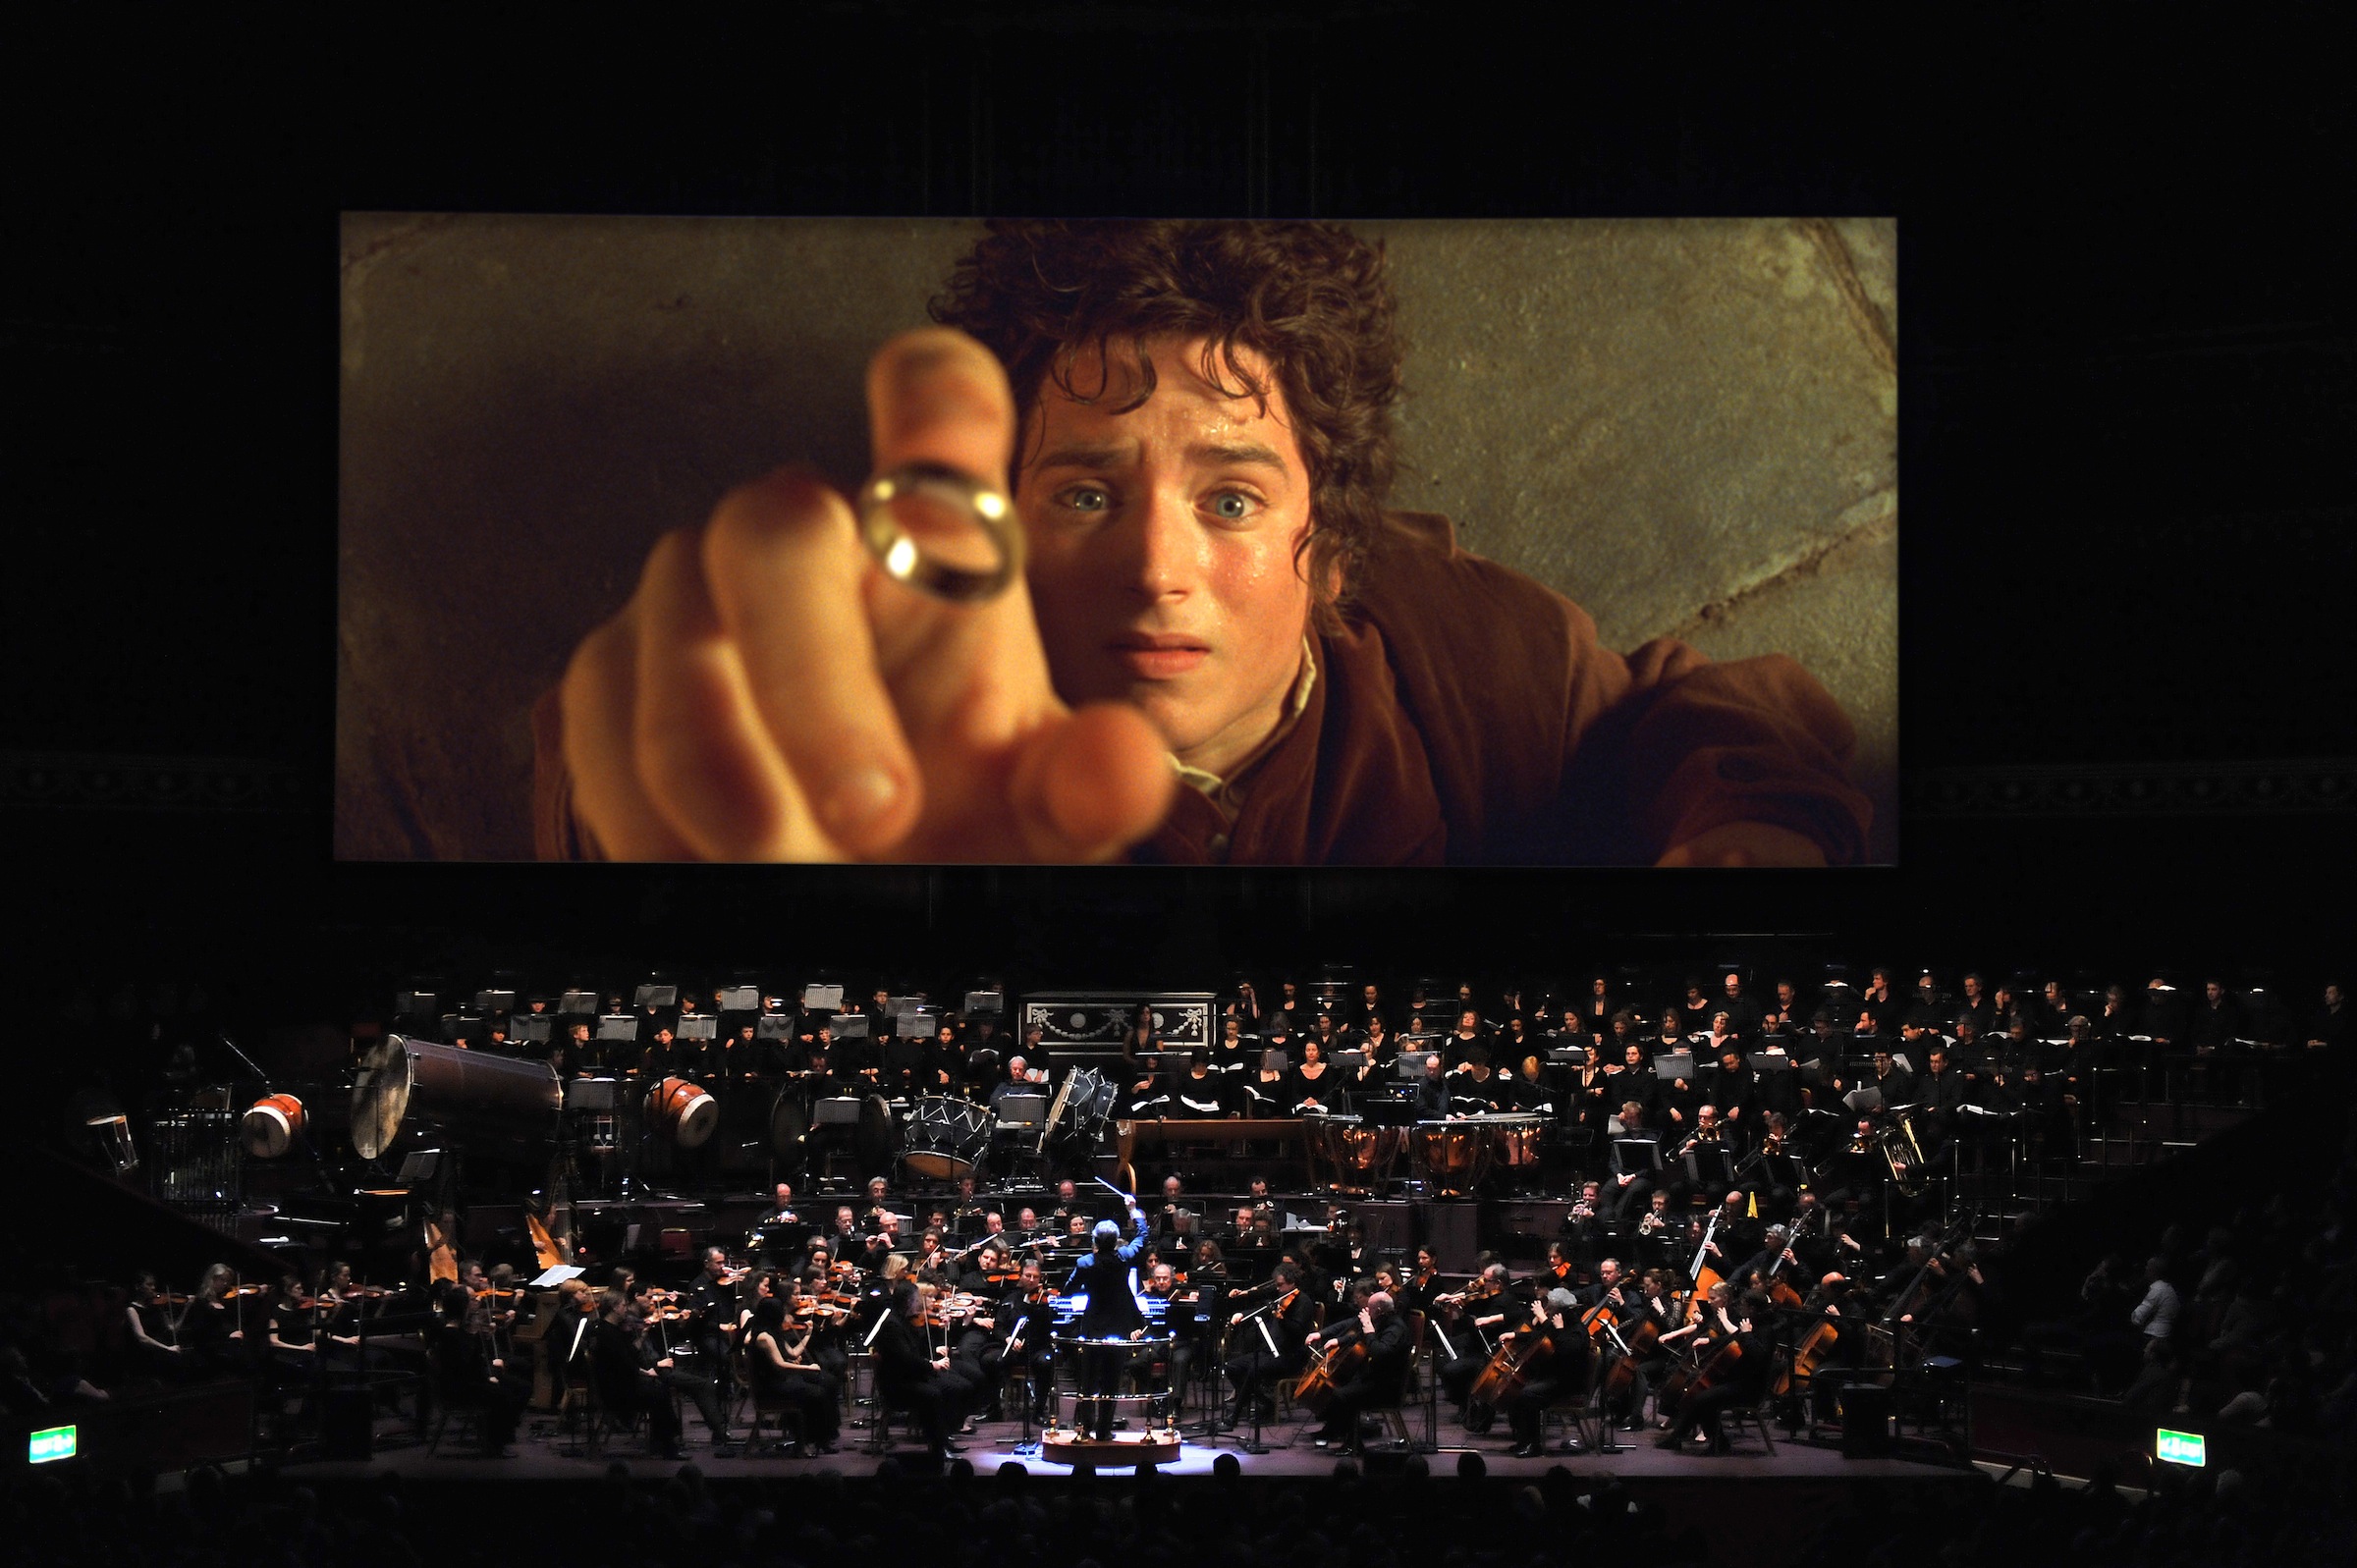 Movie Night Live: Lord of the Rings: The Two Towers, The Cleveland Orchestra  at Blossom Music Center, Cuyahoga Falls OH, Music